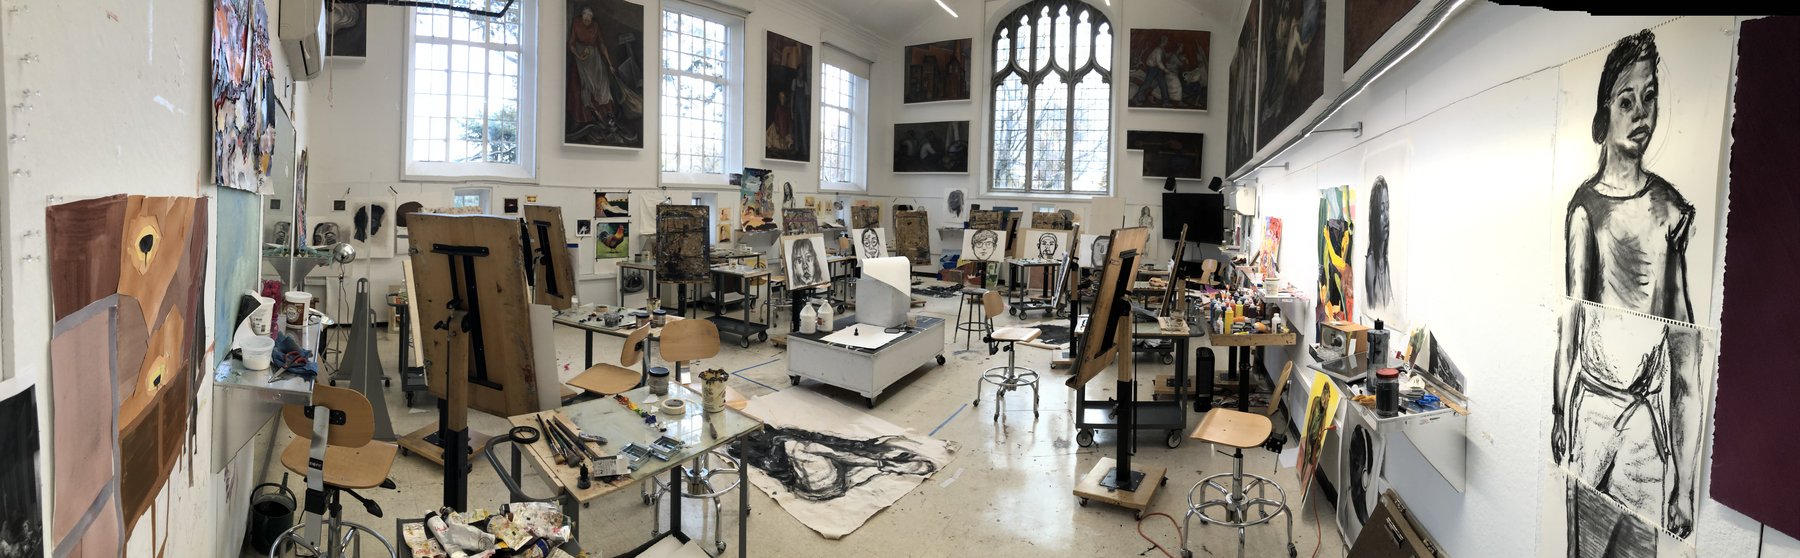 View of Painting studio in Old Tarble.